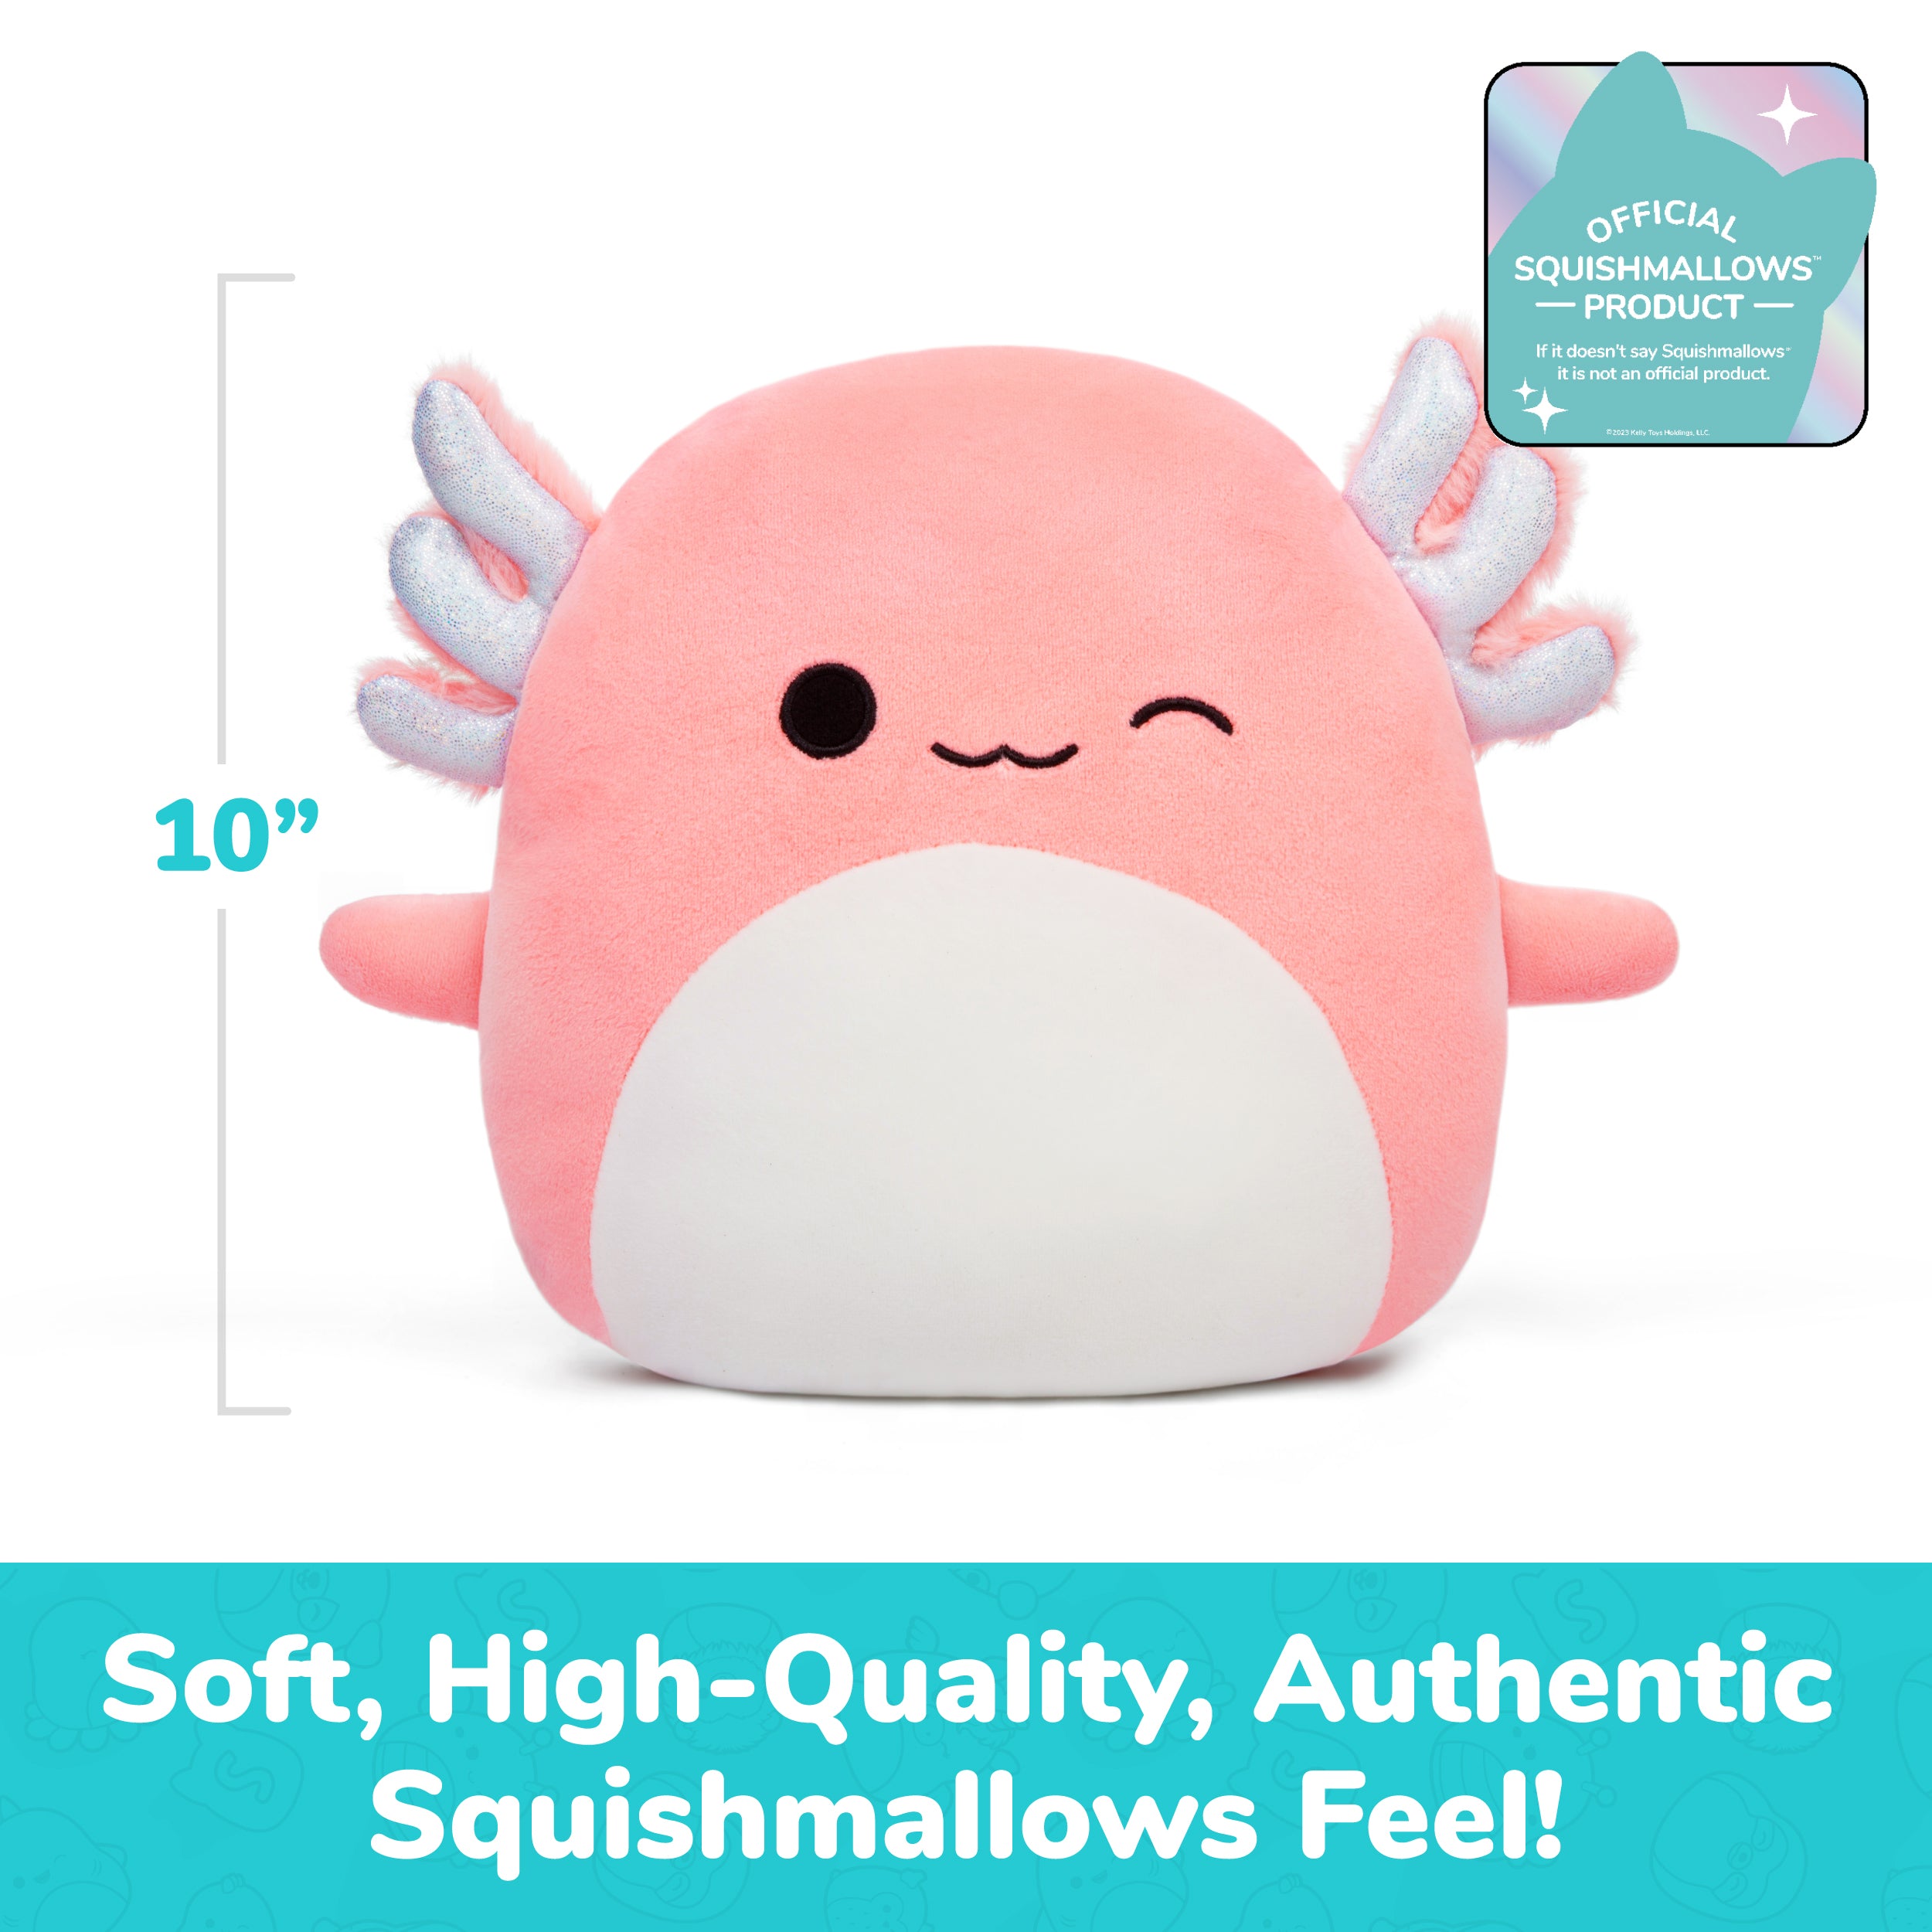 Squishmallows Archie the Axolotl Heating Pad